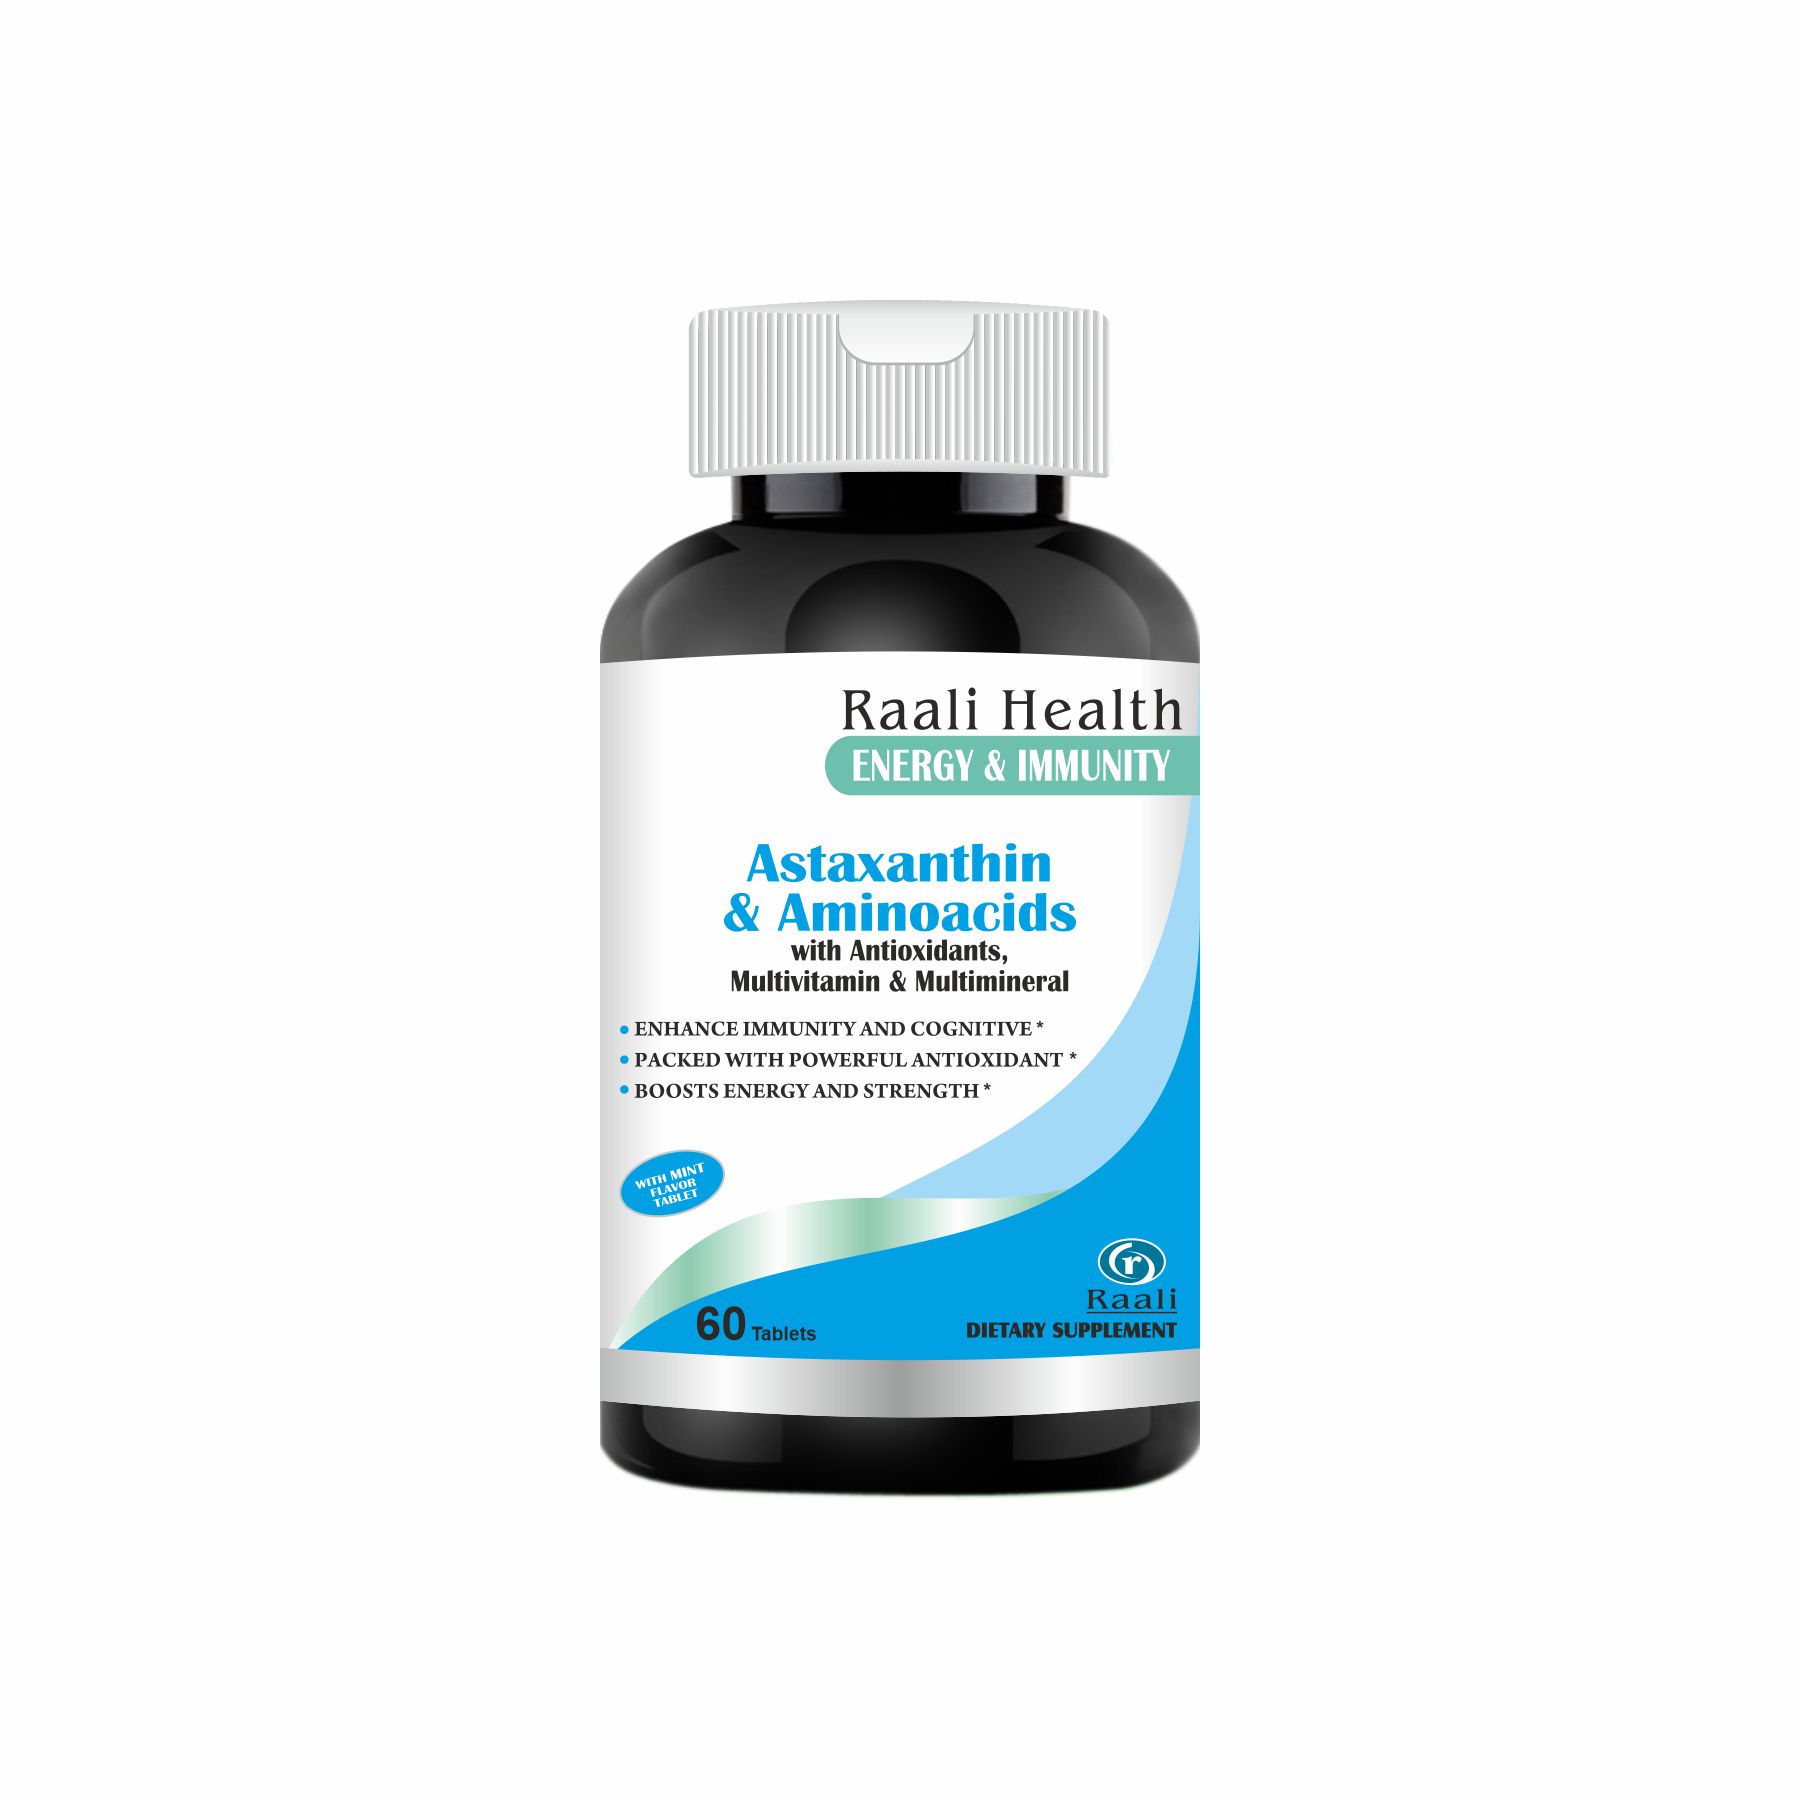 Astaxanthin & Aminoacids with powerful antioxidant, multivitamin, multiminerals, immune support, boost energy, strength